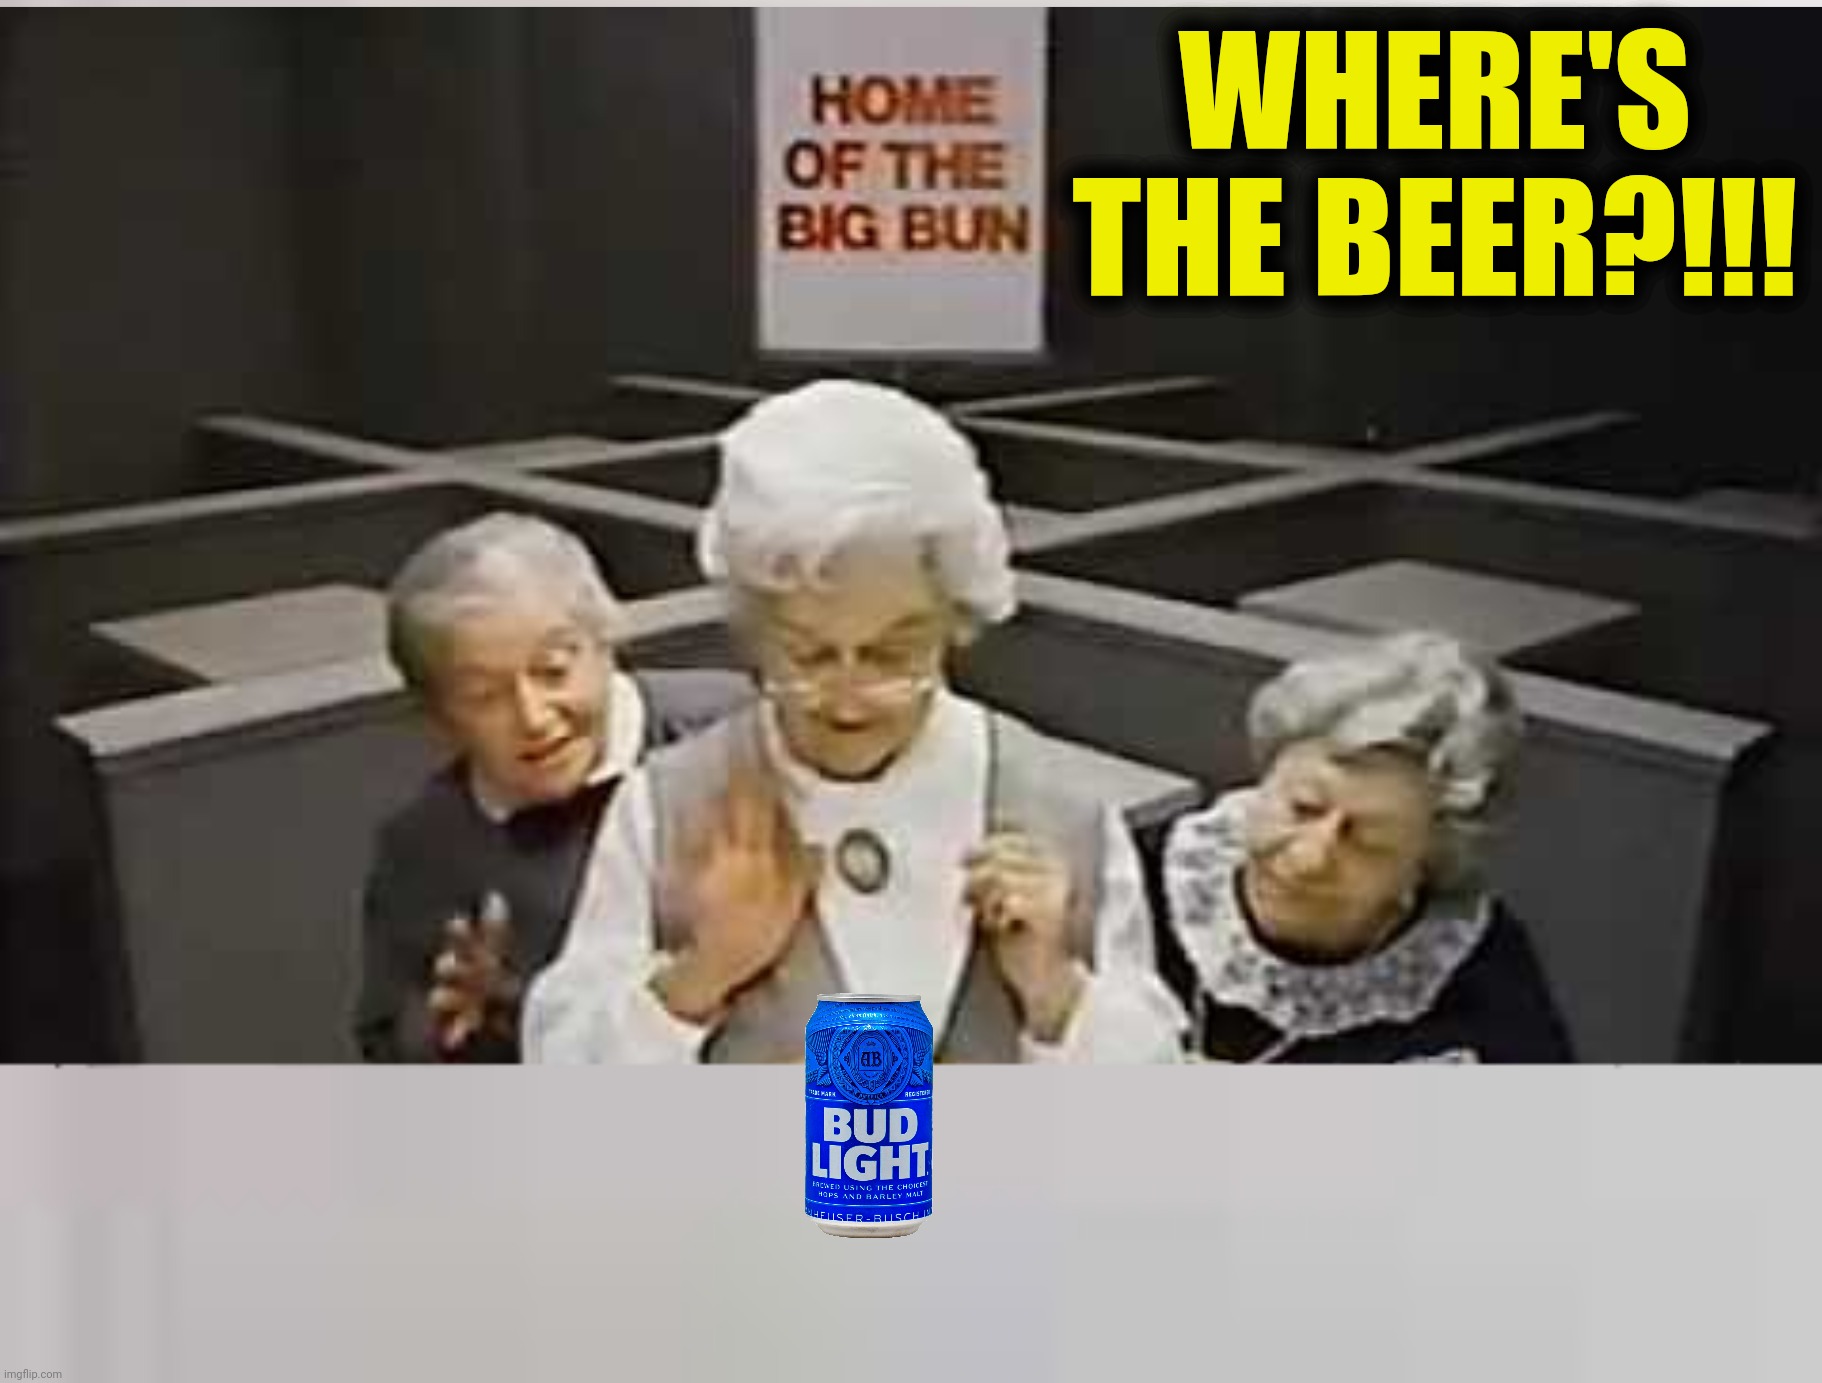 WHERE'S THE BEER?!!! | made w/ Imgflip meme maker